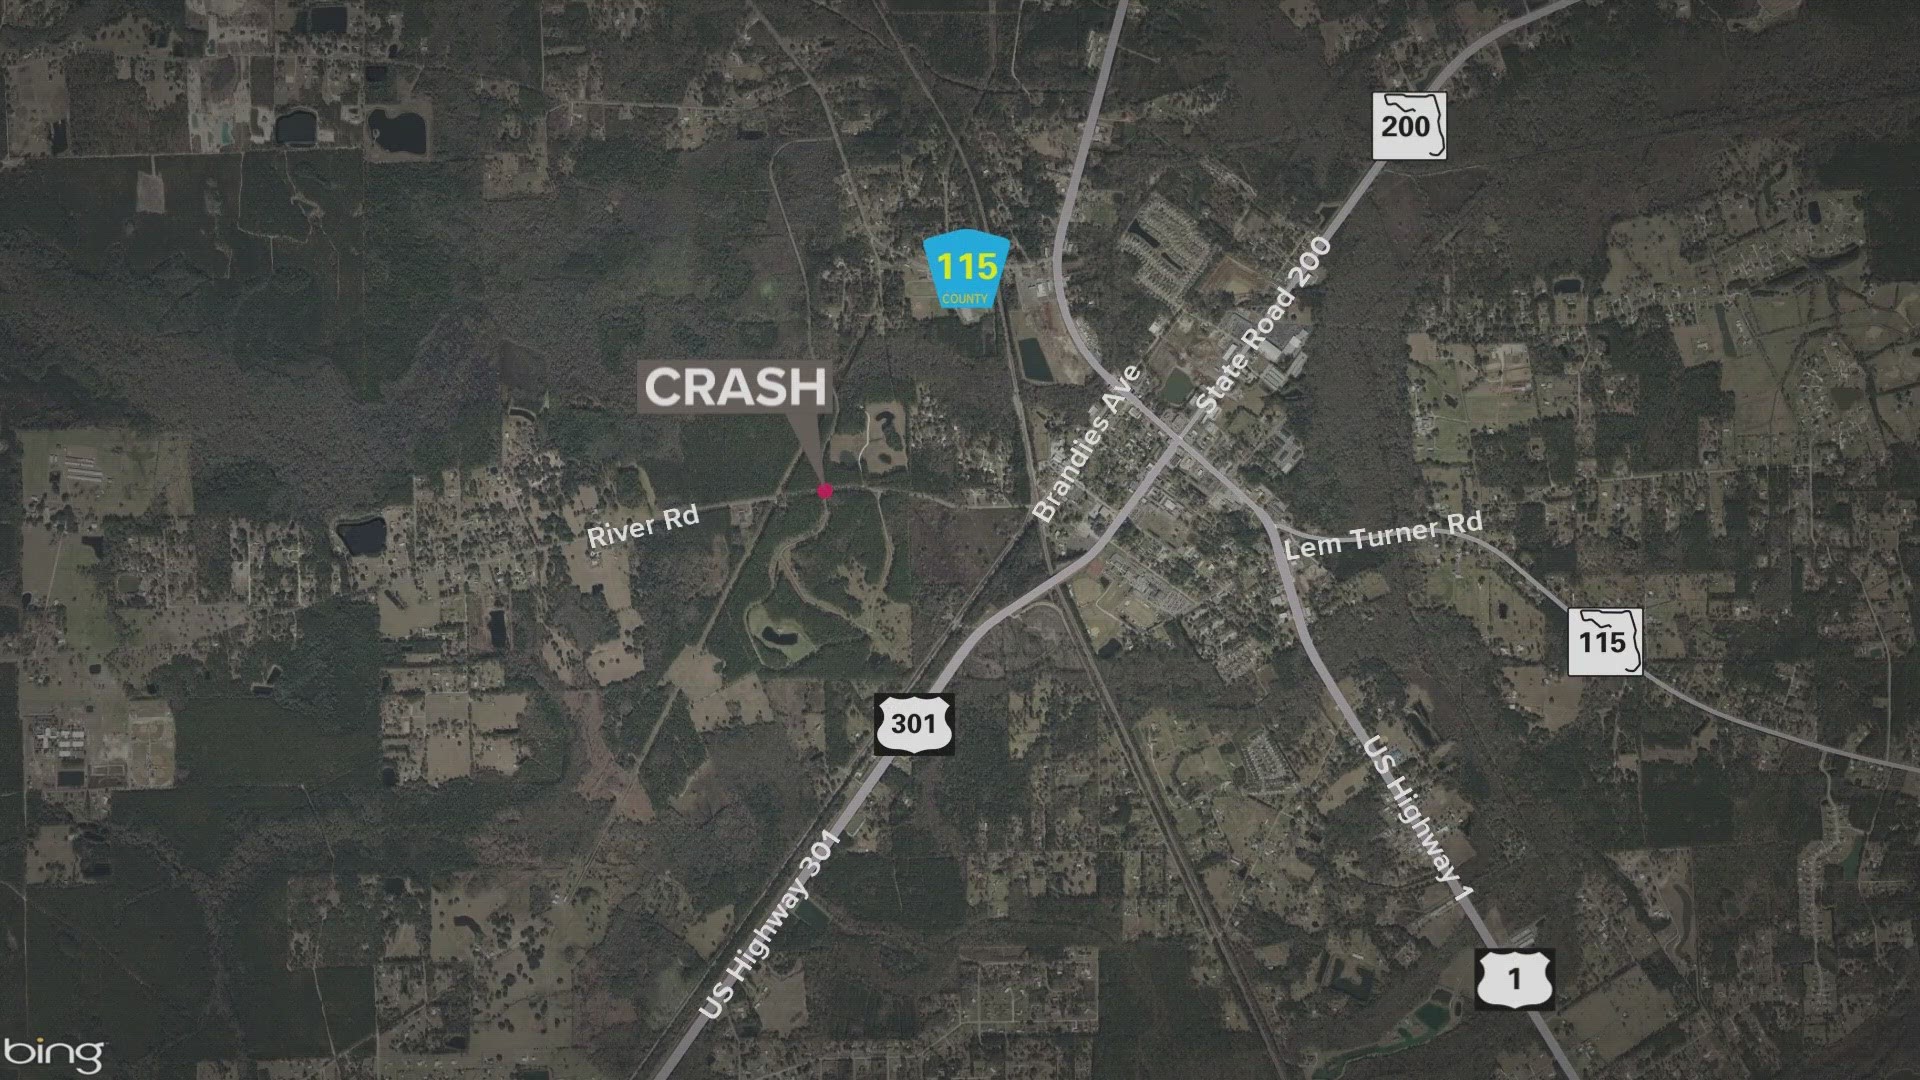 The Florida Highway Patrol said the three teens were taken to the hospital, two are in serious condition, while the third is listed in critical condition.